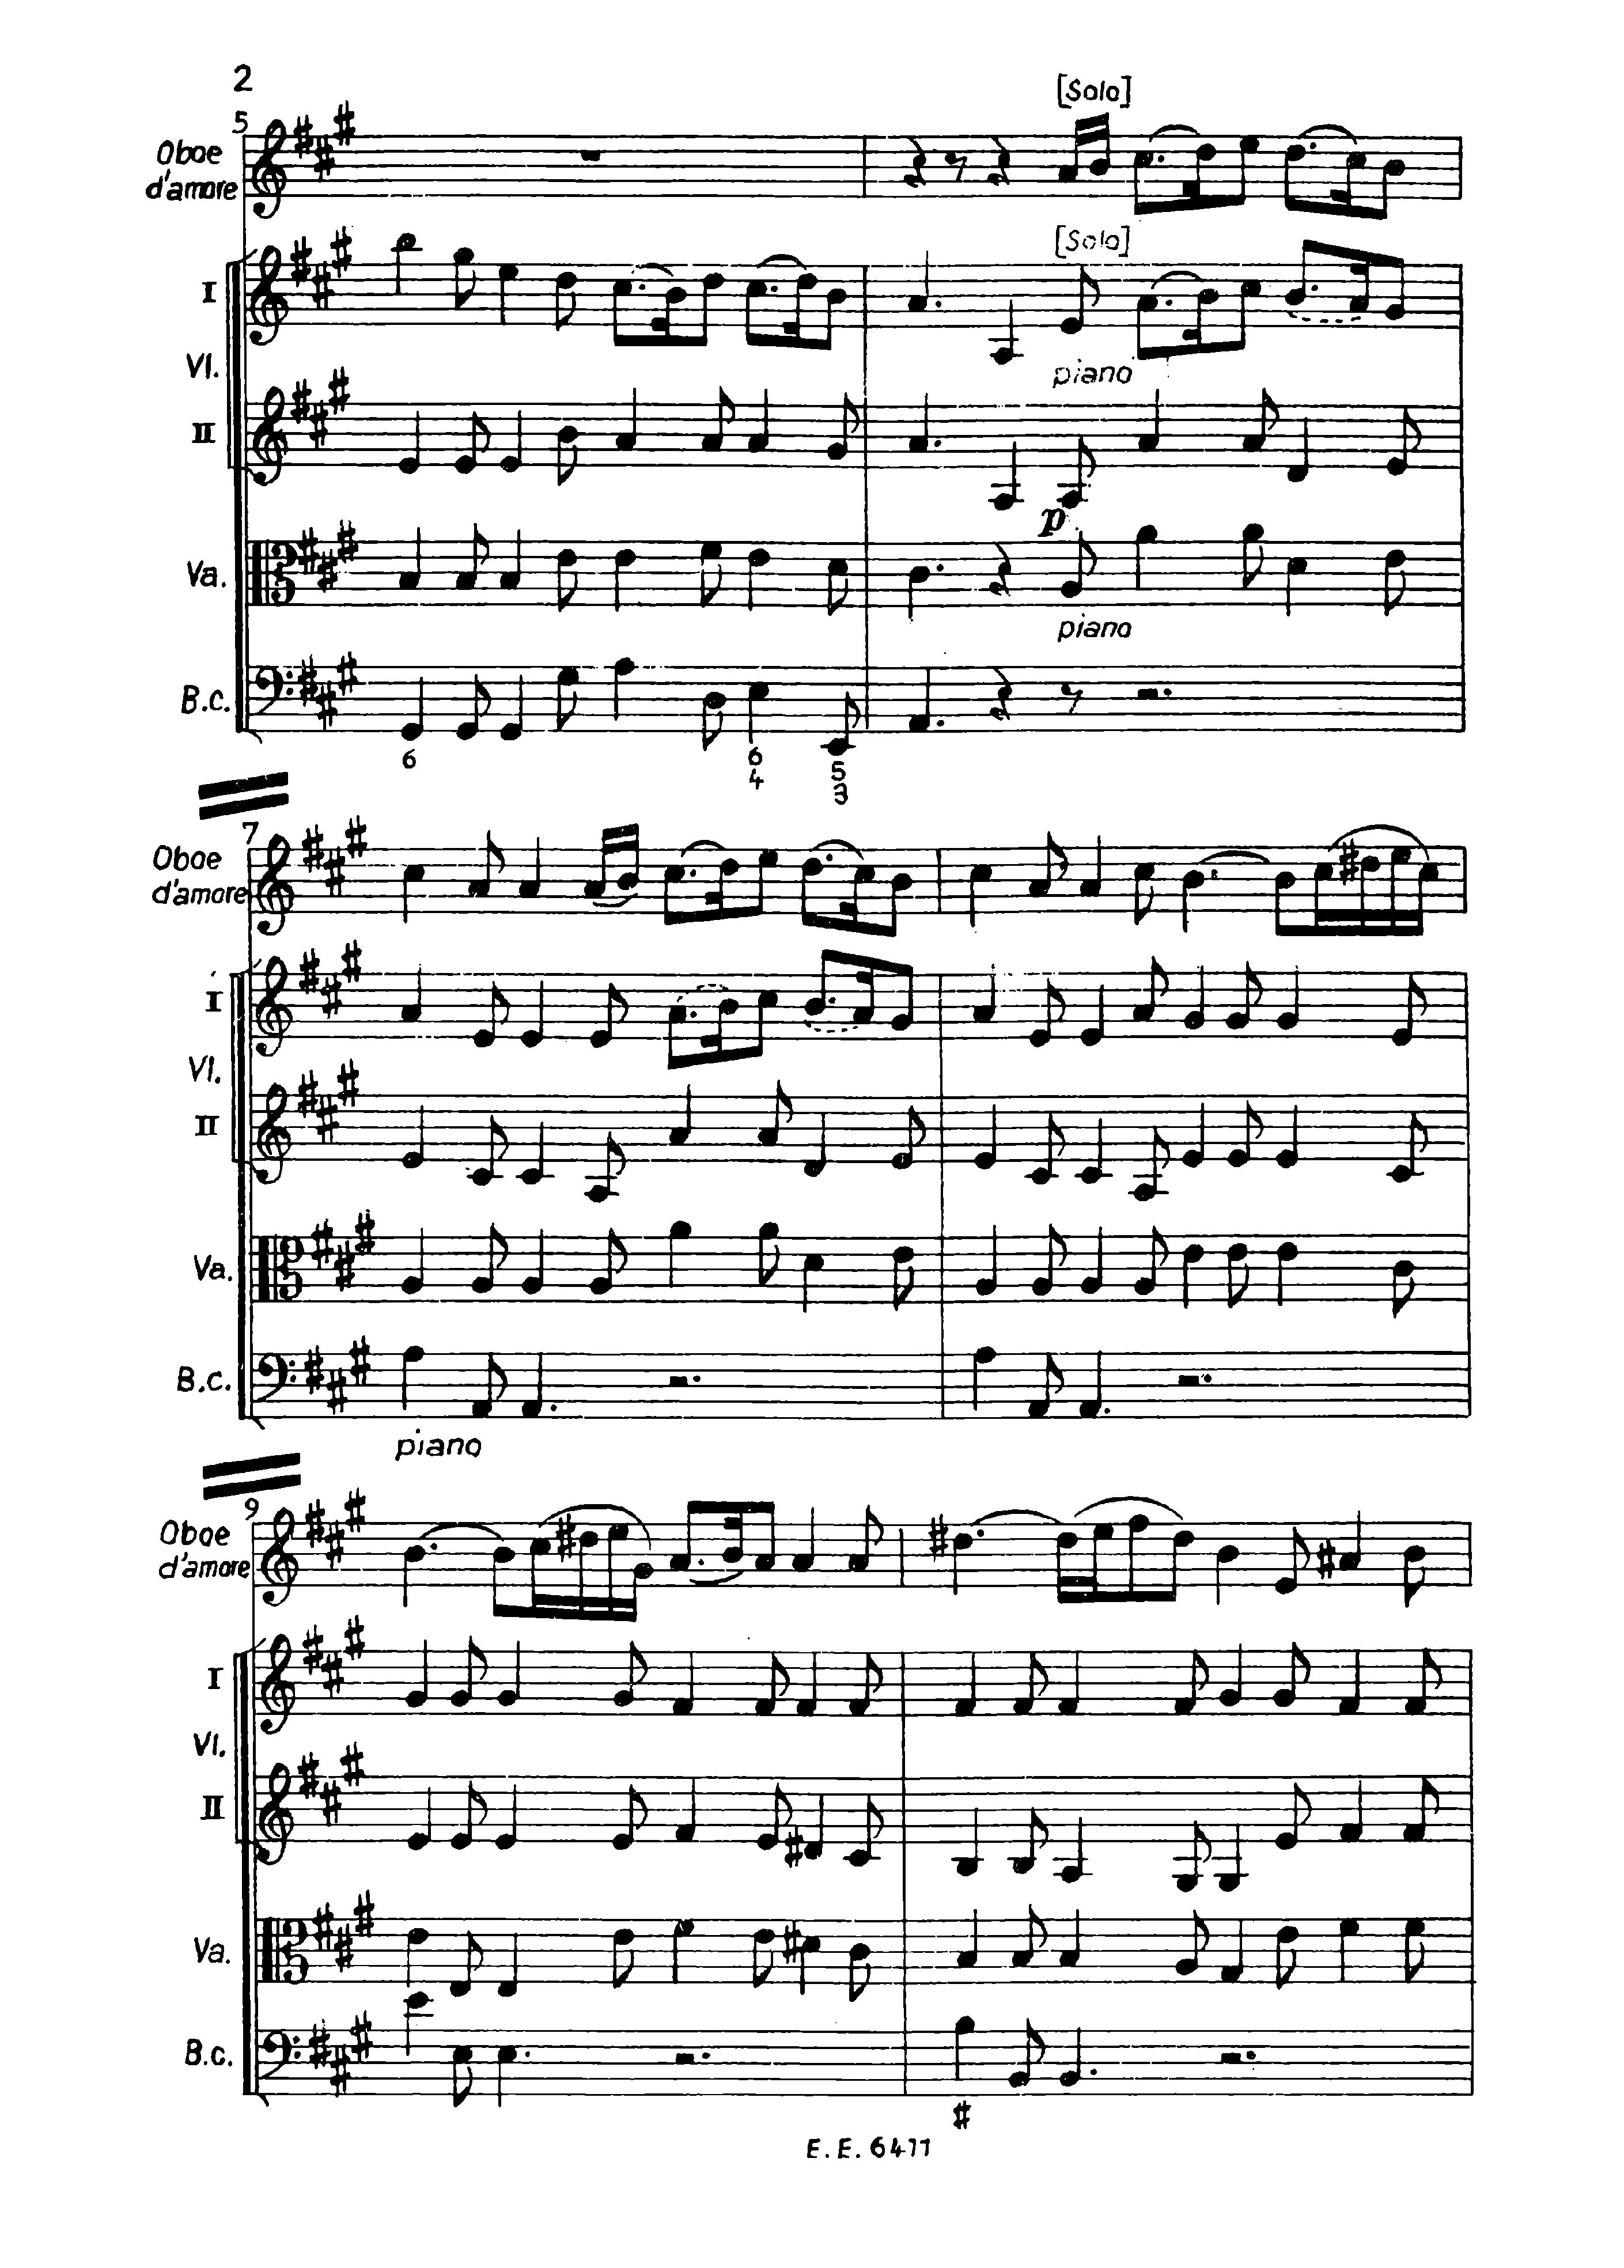 Telemann, Georg Philipp - Concerto for Oboe d'amore, TWV 51:A2 Sheet ...